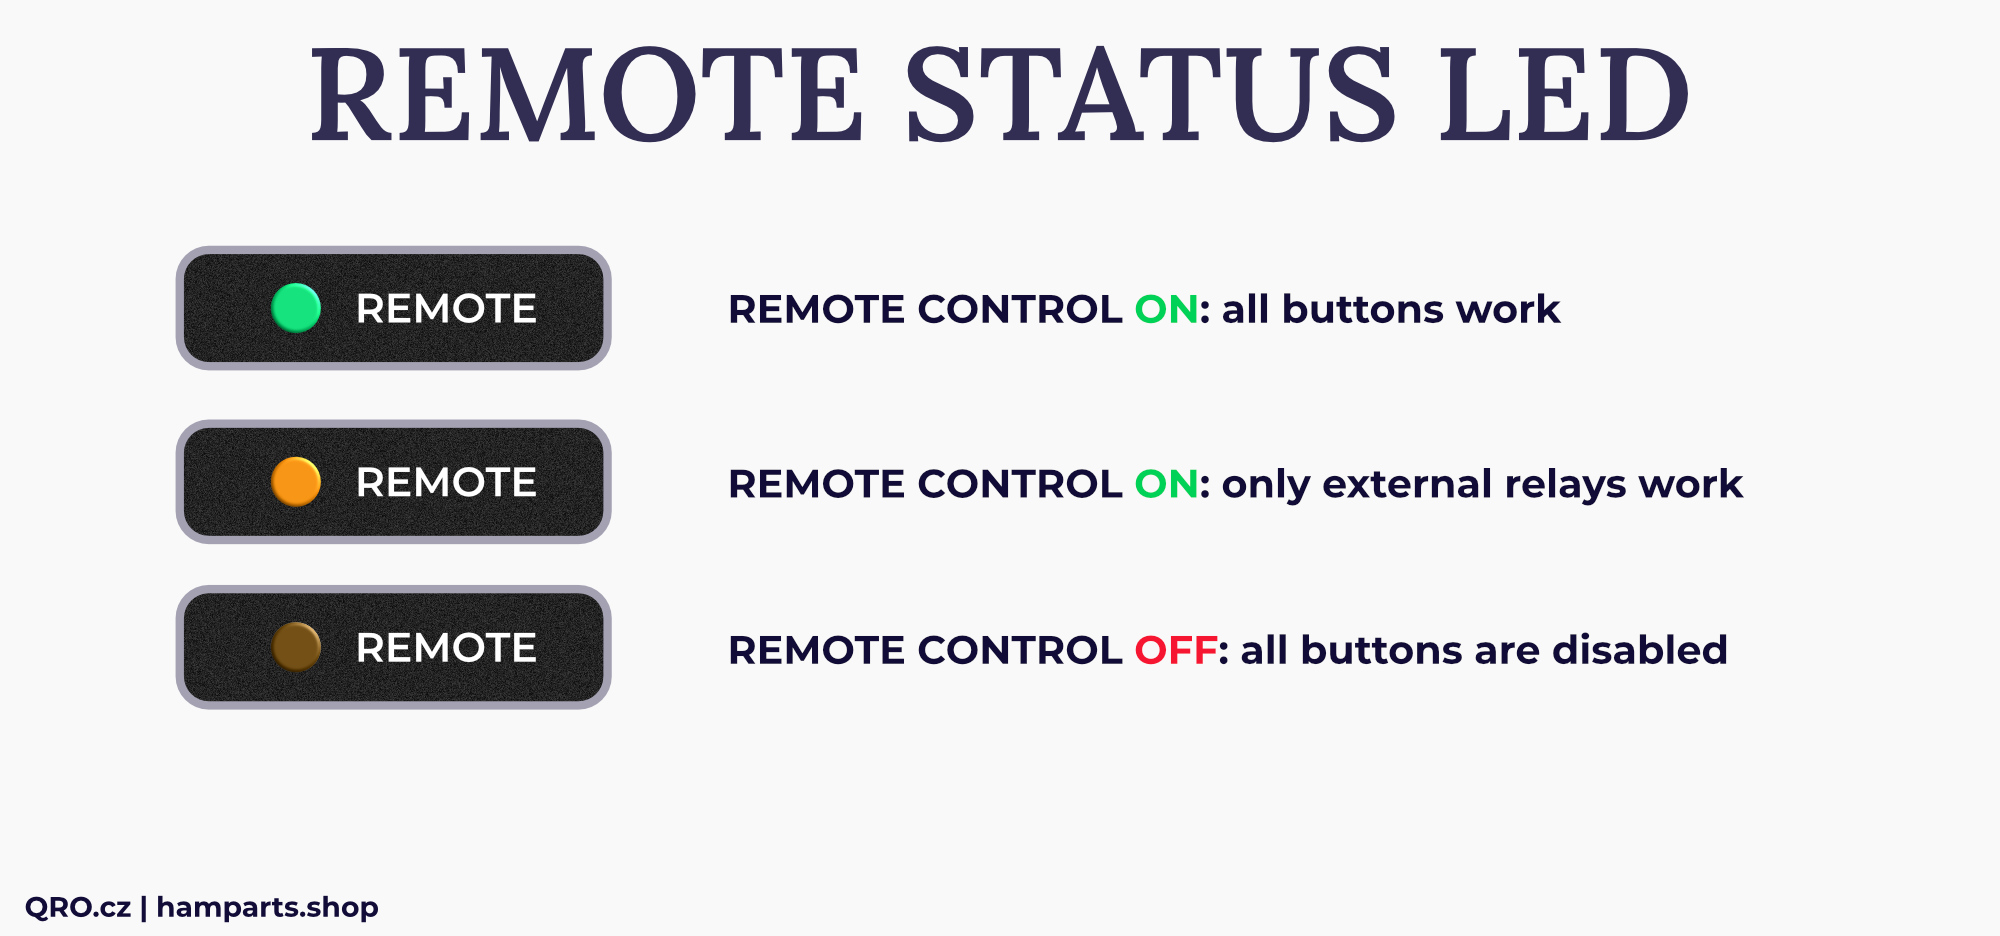 easy controller for stack match and antenna switch status led for remote version by qro.cz hamparts.shop